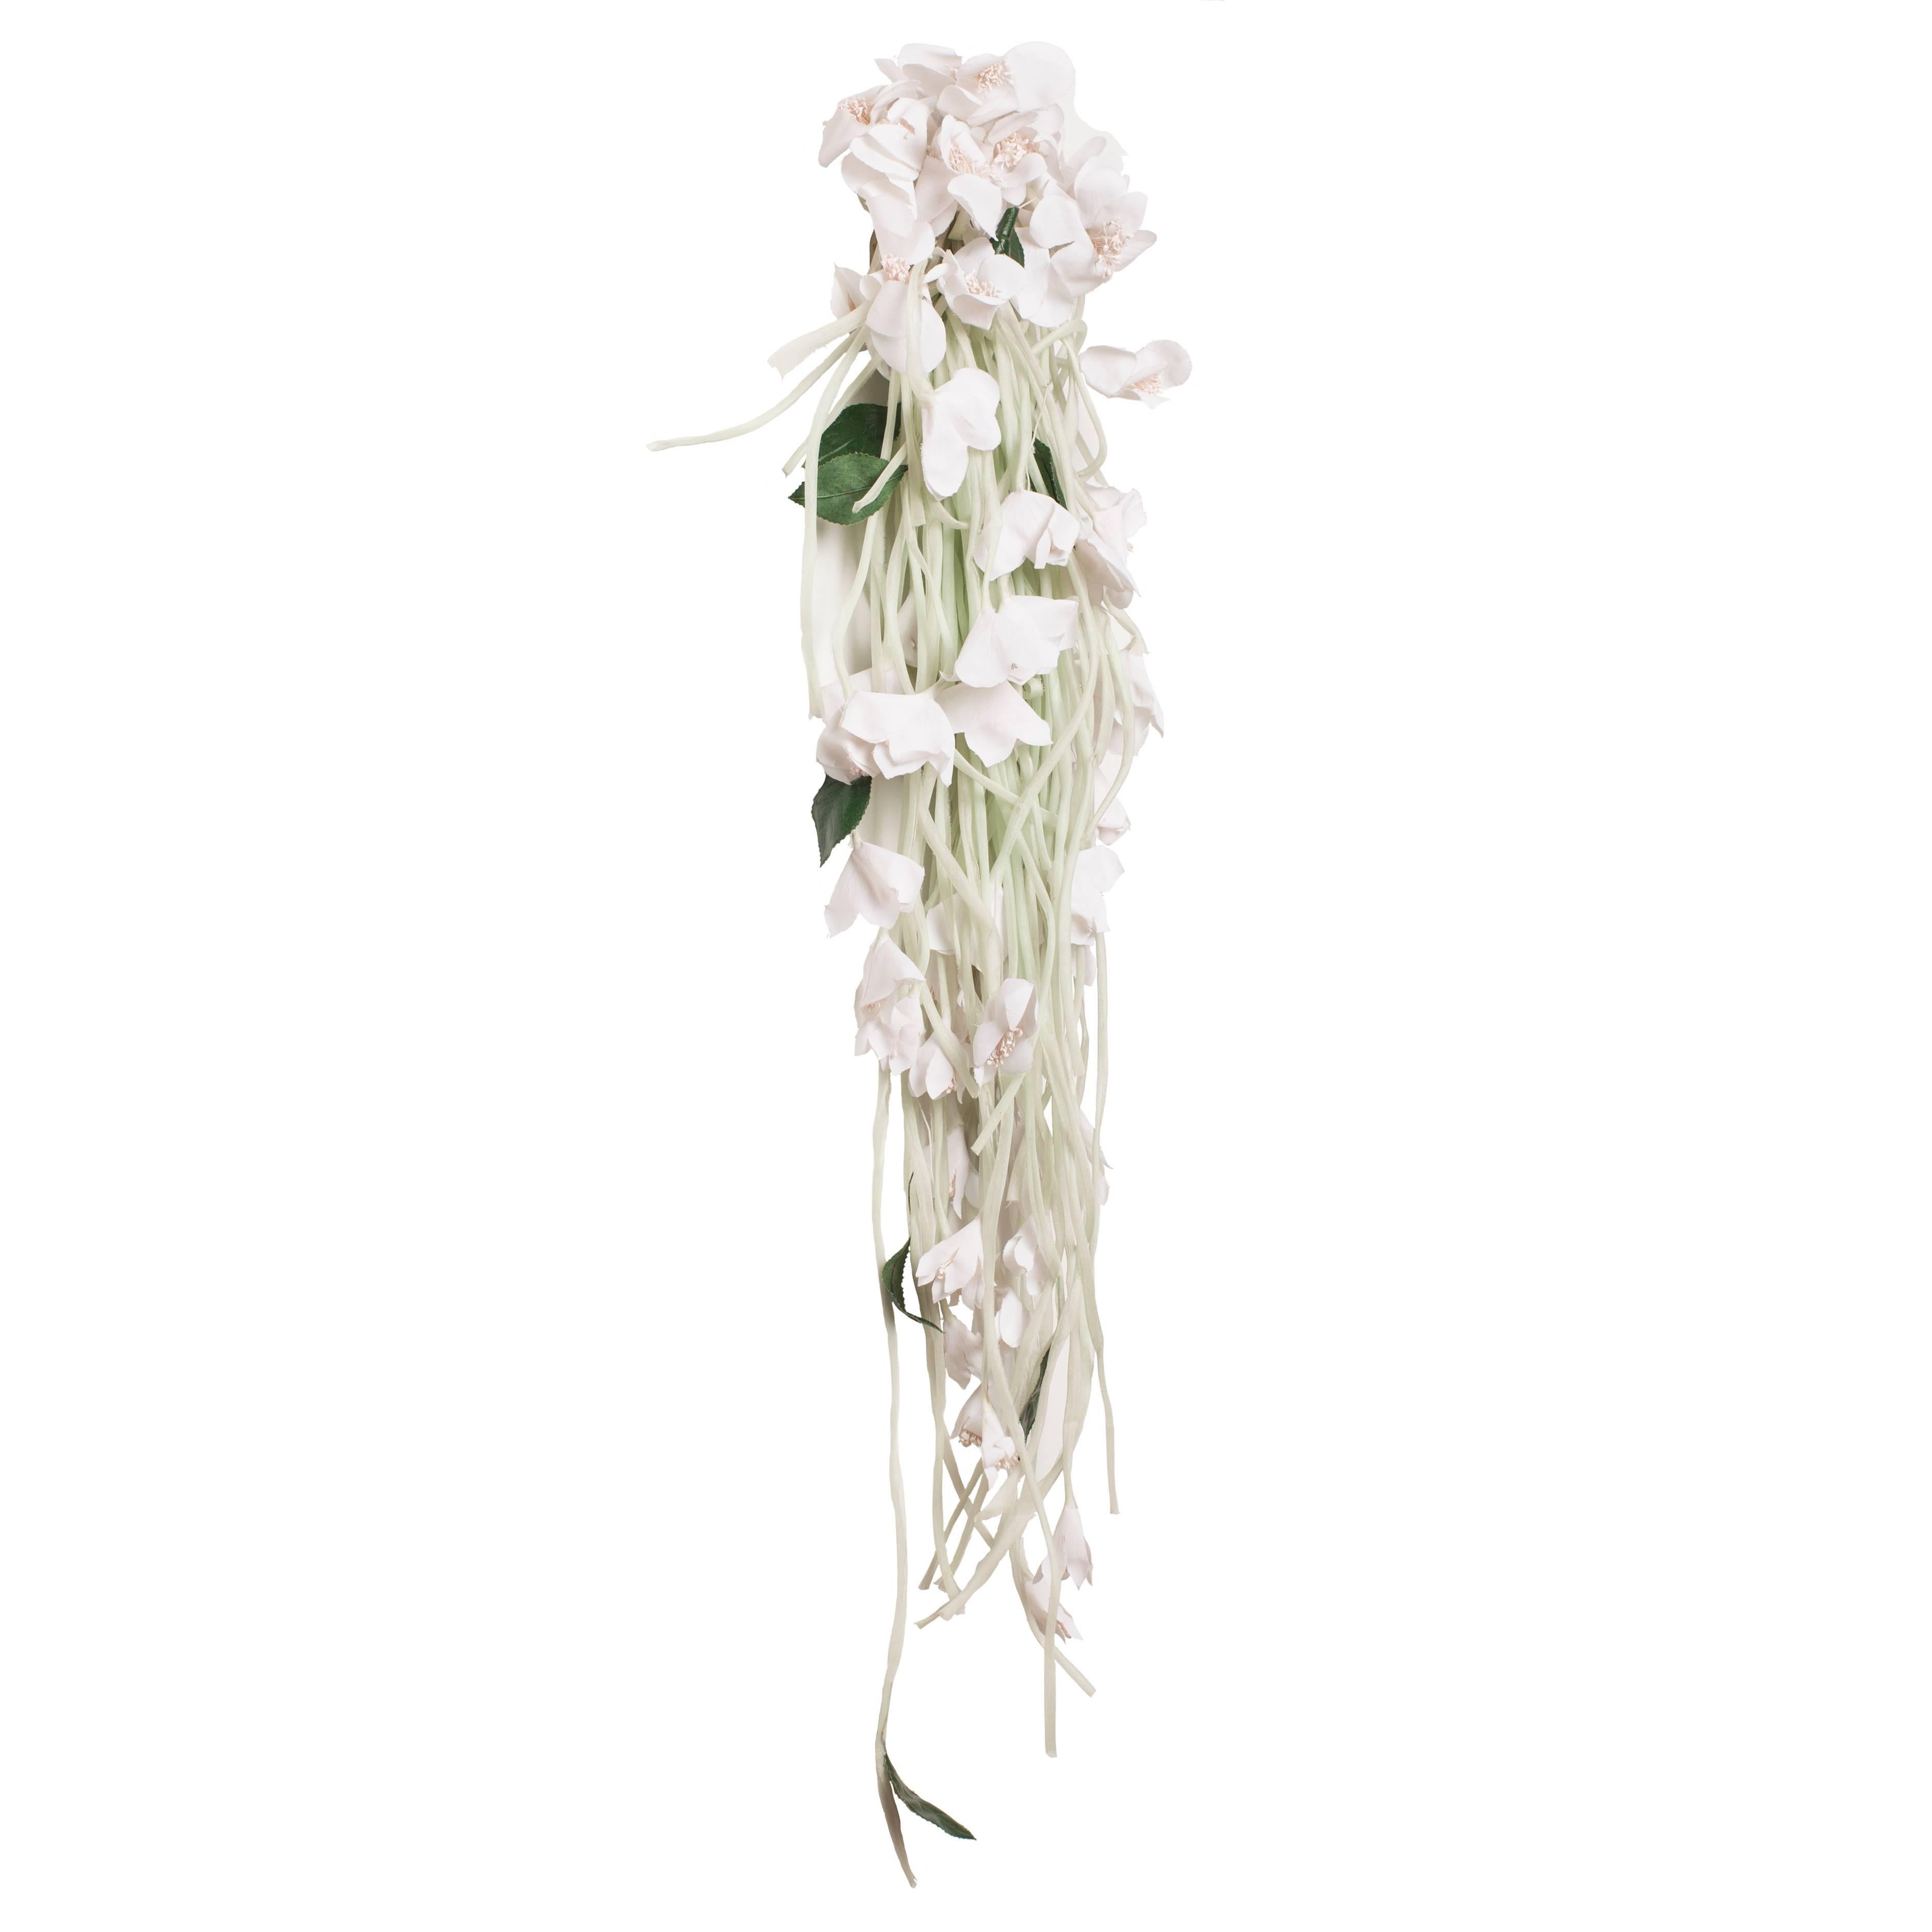 Couture hair piece from French atelier from circa 1970's. Shades of light green stems and cream white flowers - Amazing hand crafted bias cut materials gives natural carls. Some of the stems has thin wires -  gives perfect volume and movement.